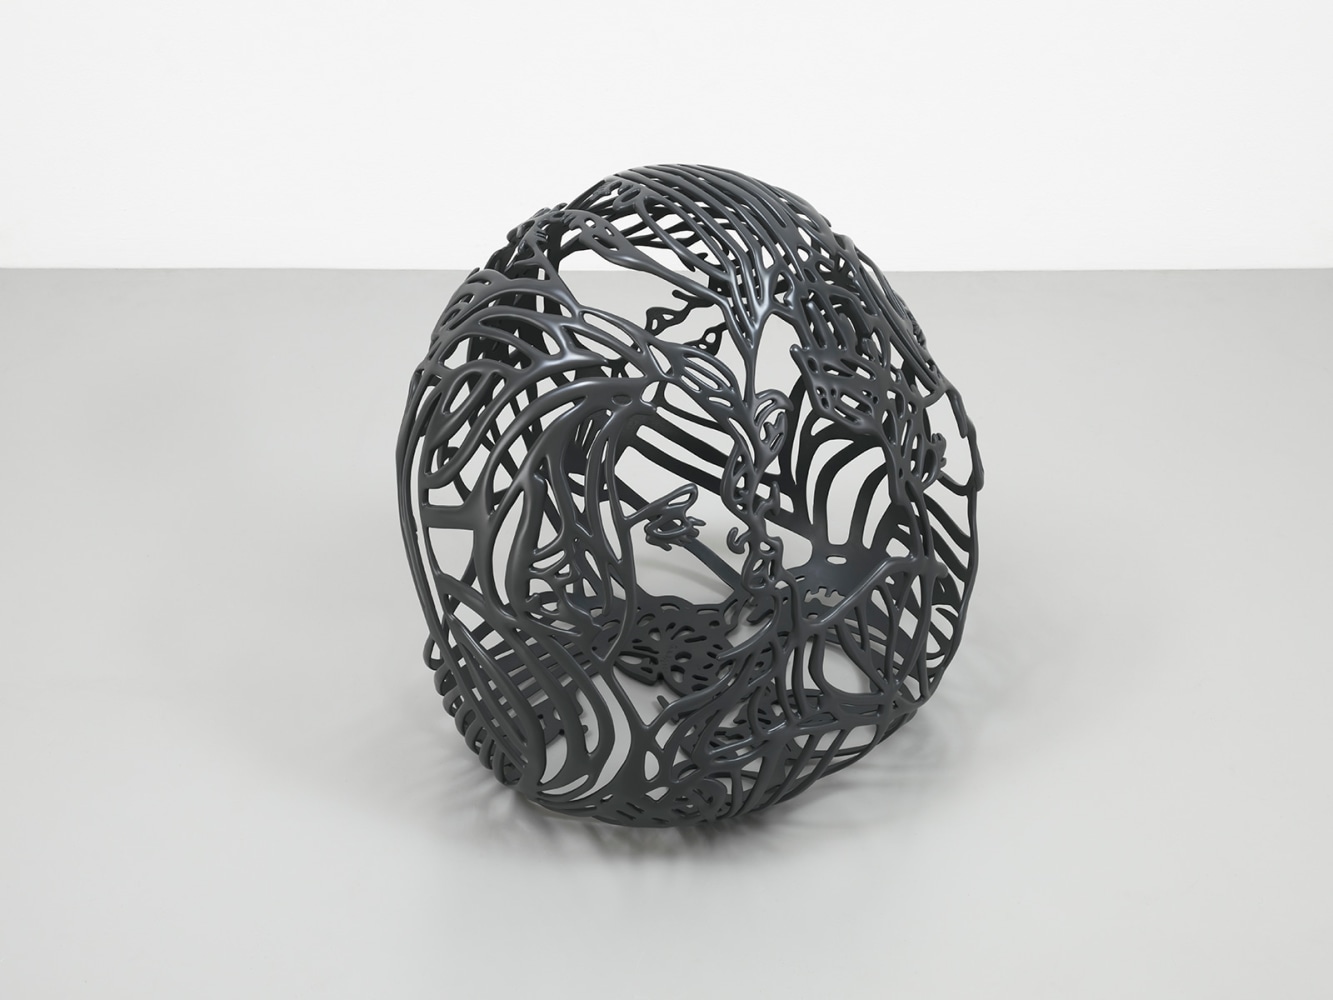 Baisers 1 by Ghada Amer, 2011-12, Black Painted bronze, Sculpture, Tina Kim Gallery